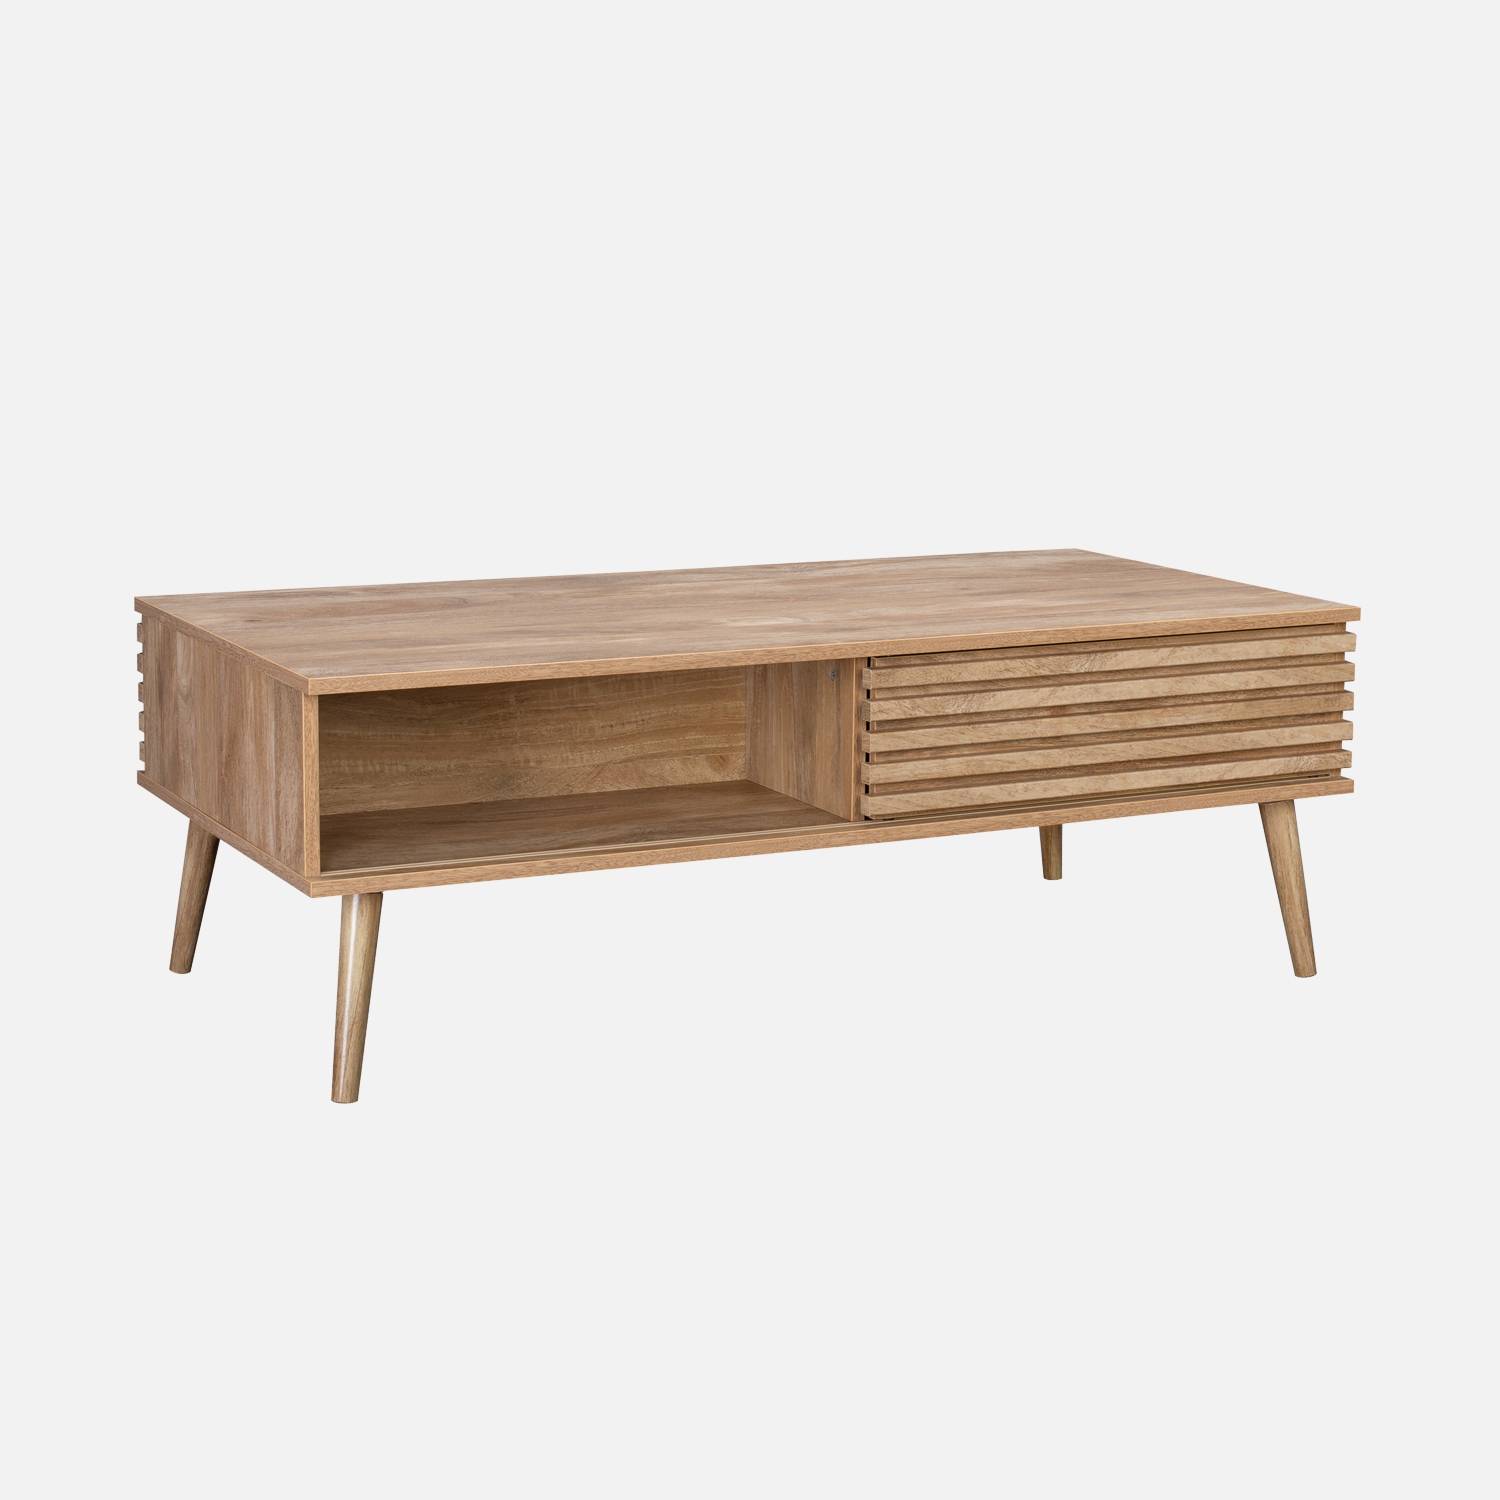 Coffee table with sliding doors, grooved wood decor l sweeek